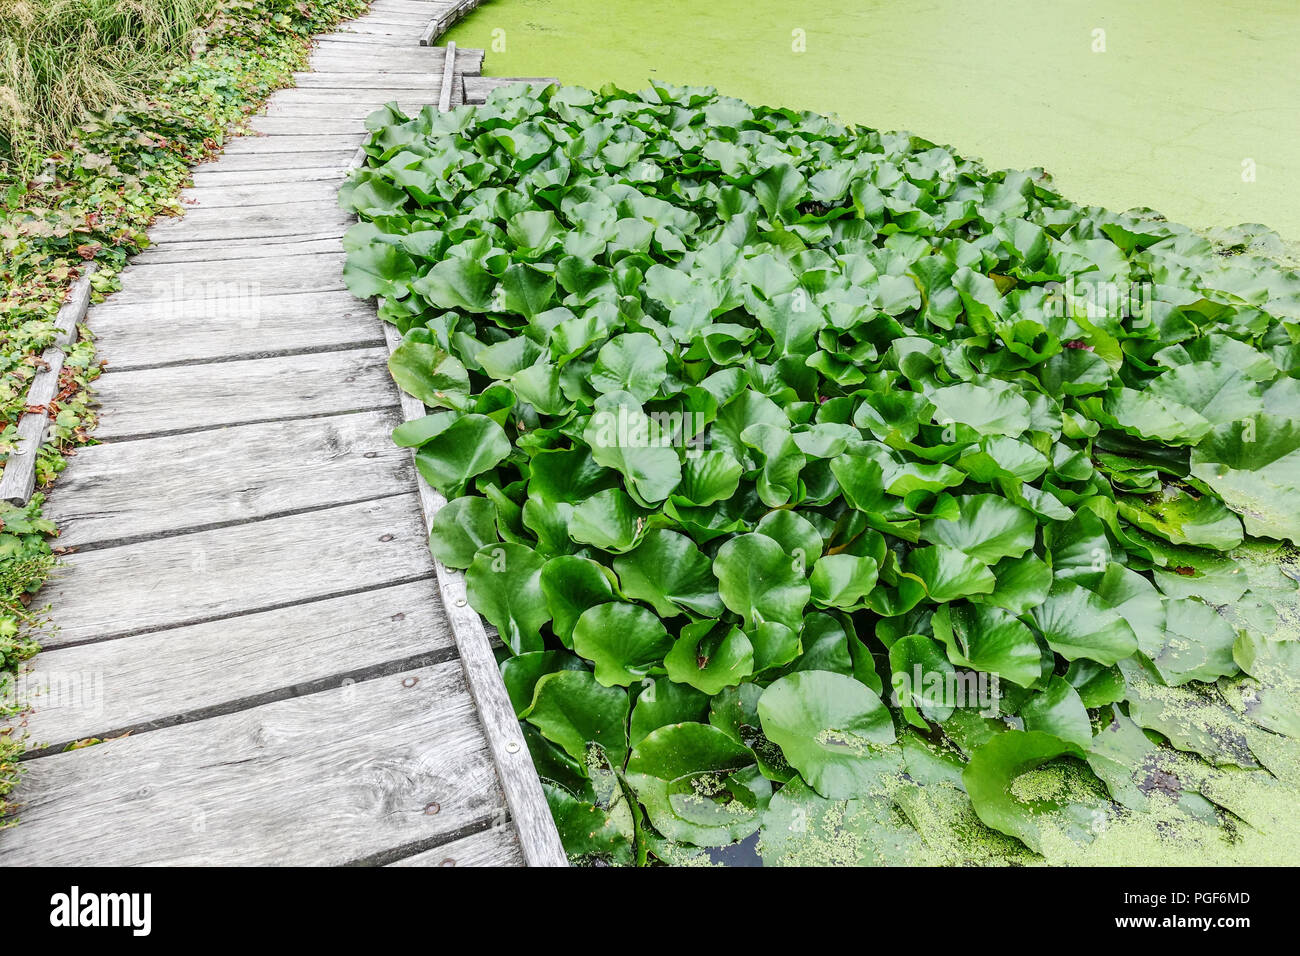 Garden pond path, Duckweed covered pond Stock Photo